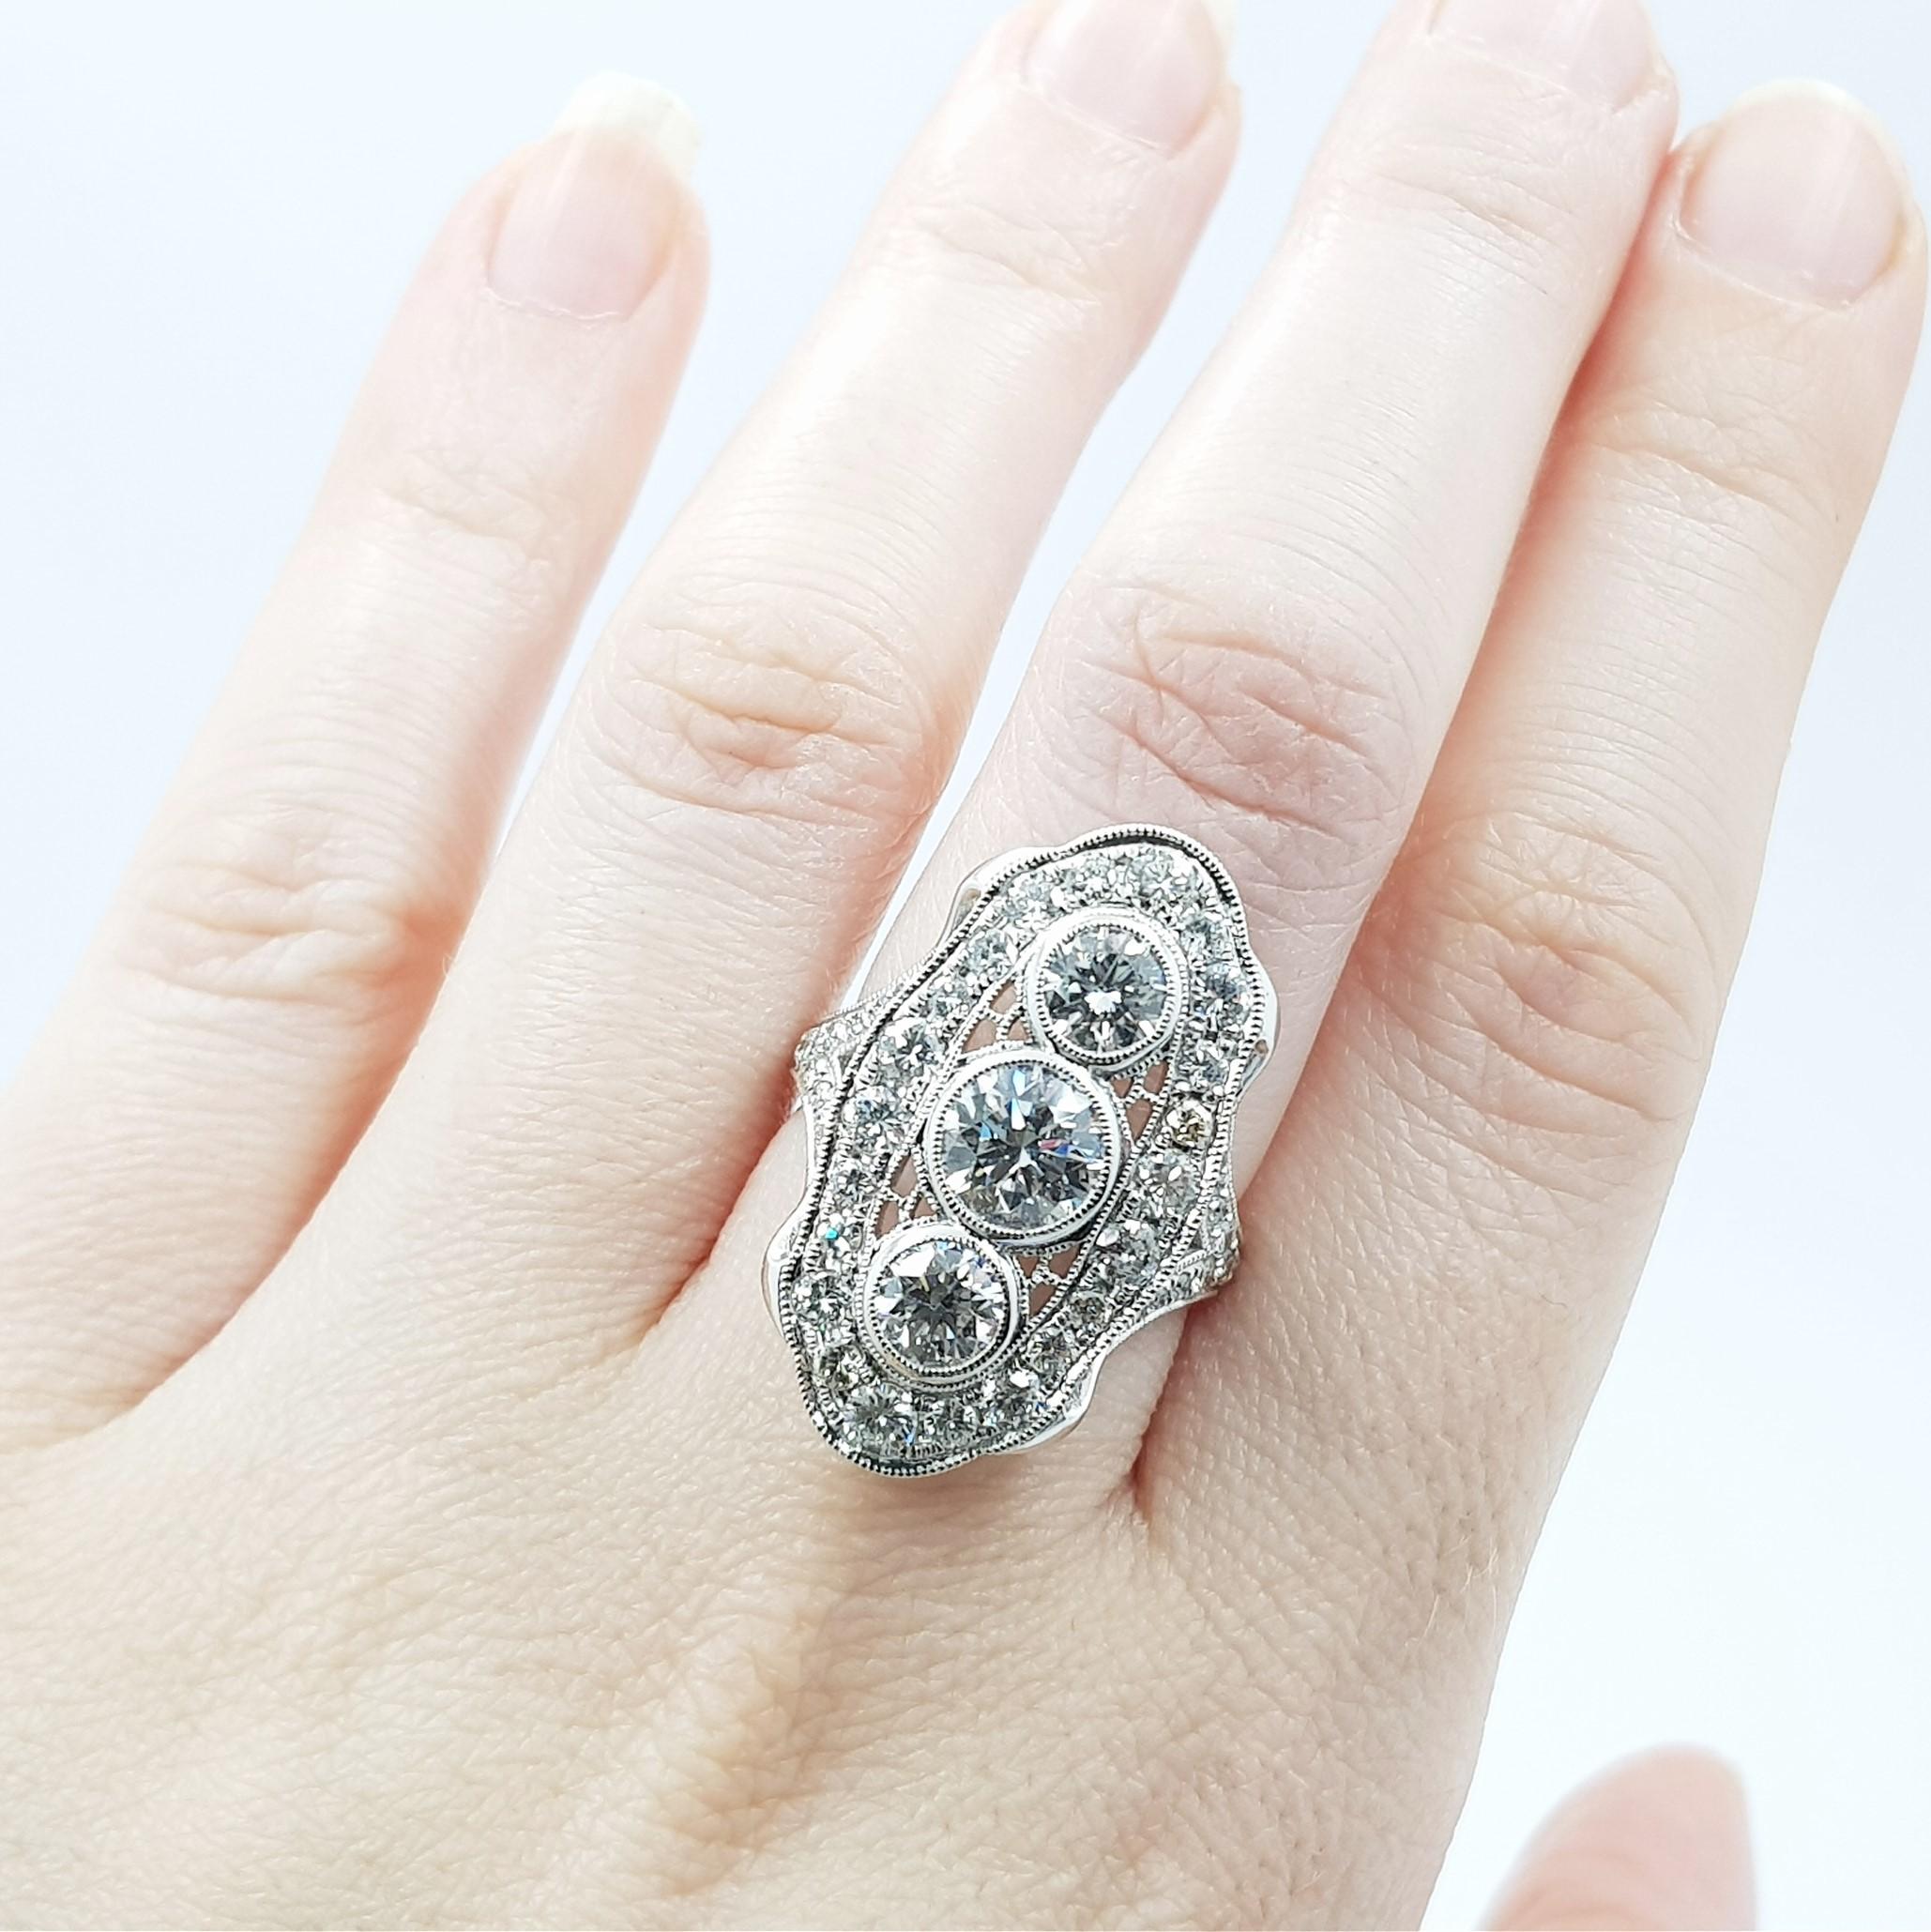 This stunning ring radiates light and calls forth the charm and elegance of vintage designs. The main trilogy of diamonds are set in individual chenier collets with milgrain edges and then are surrounded by a halo of diamonds. The total diamond